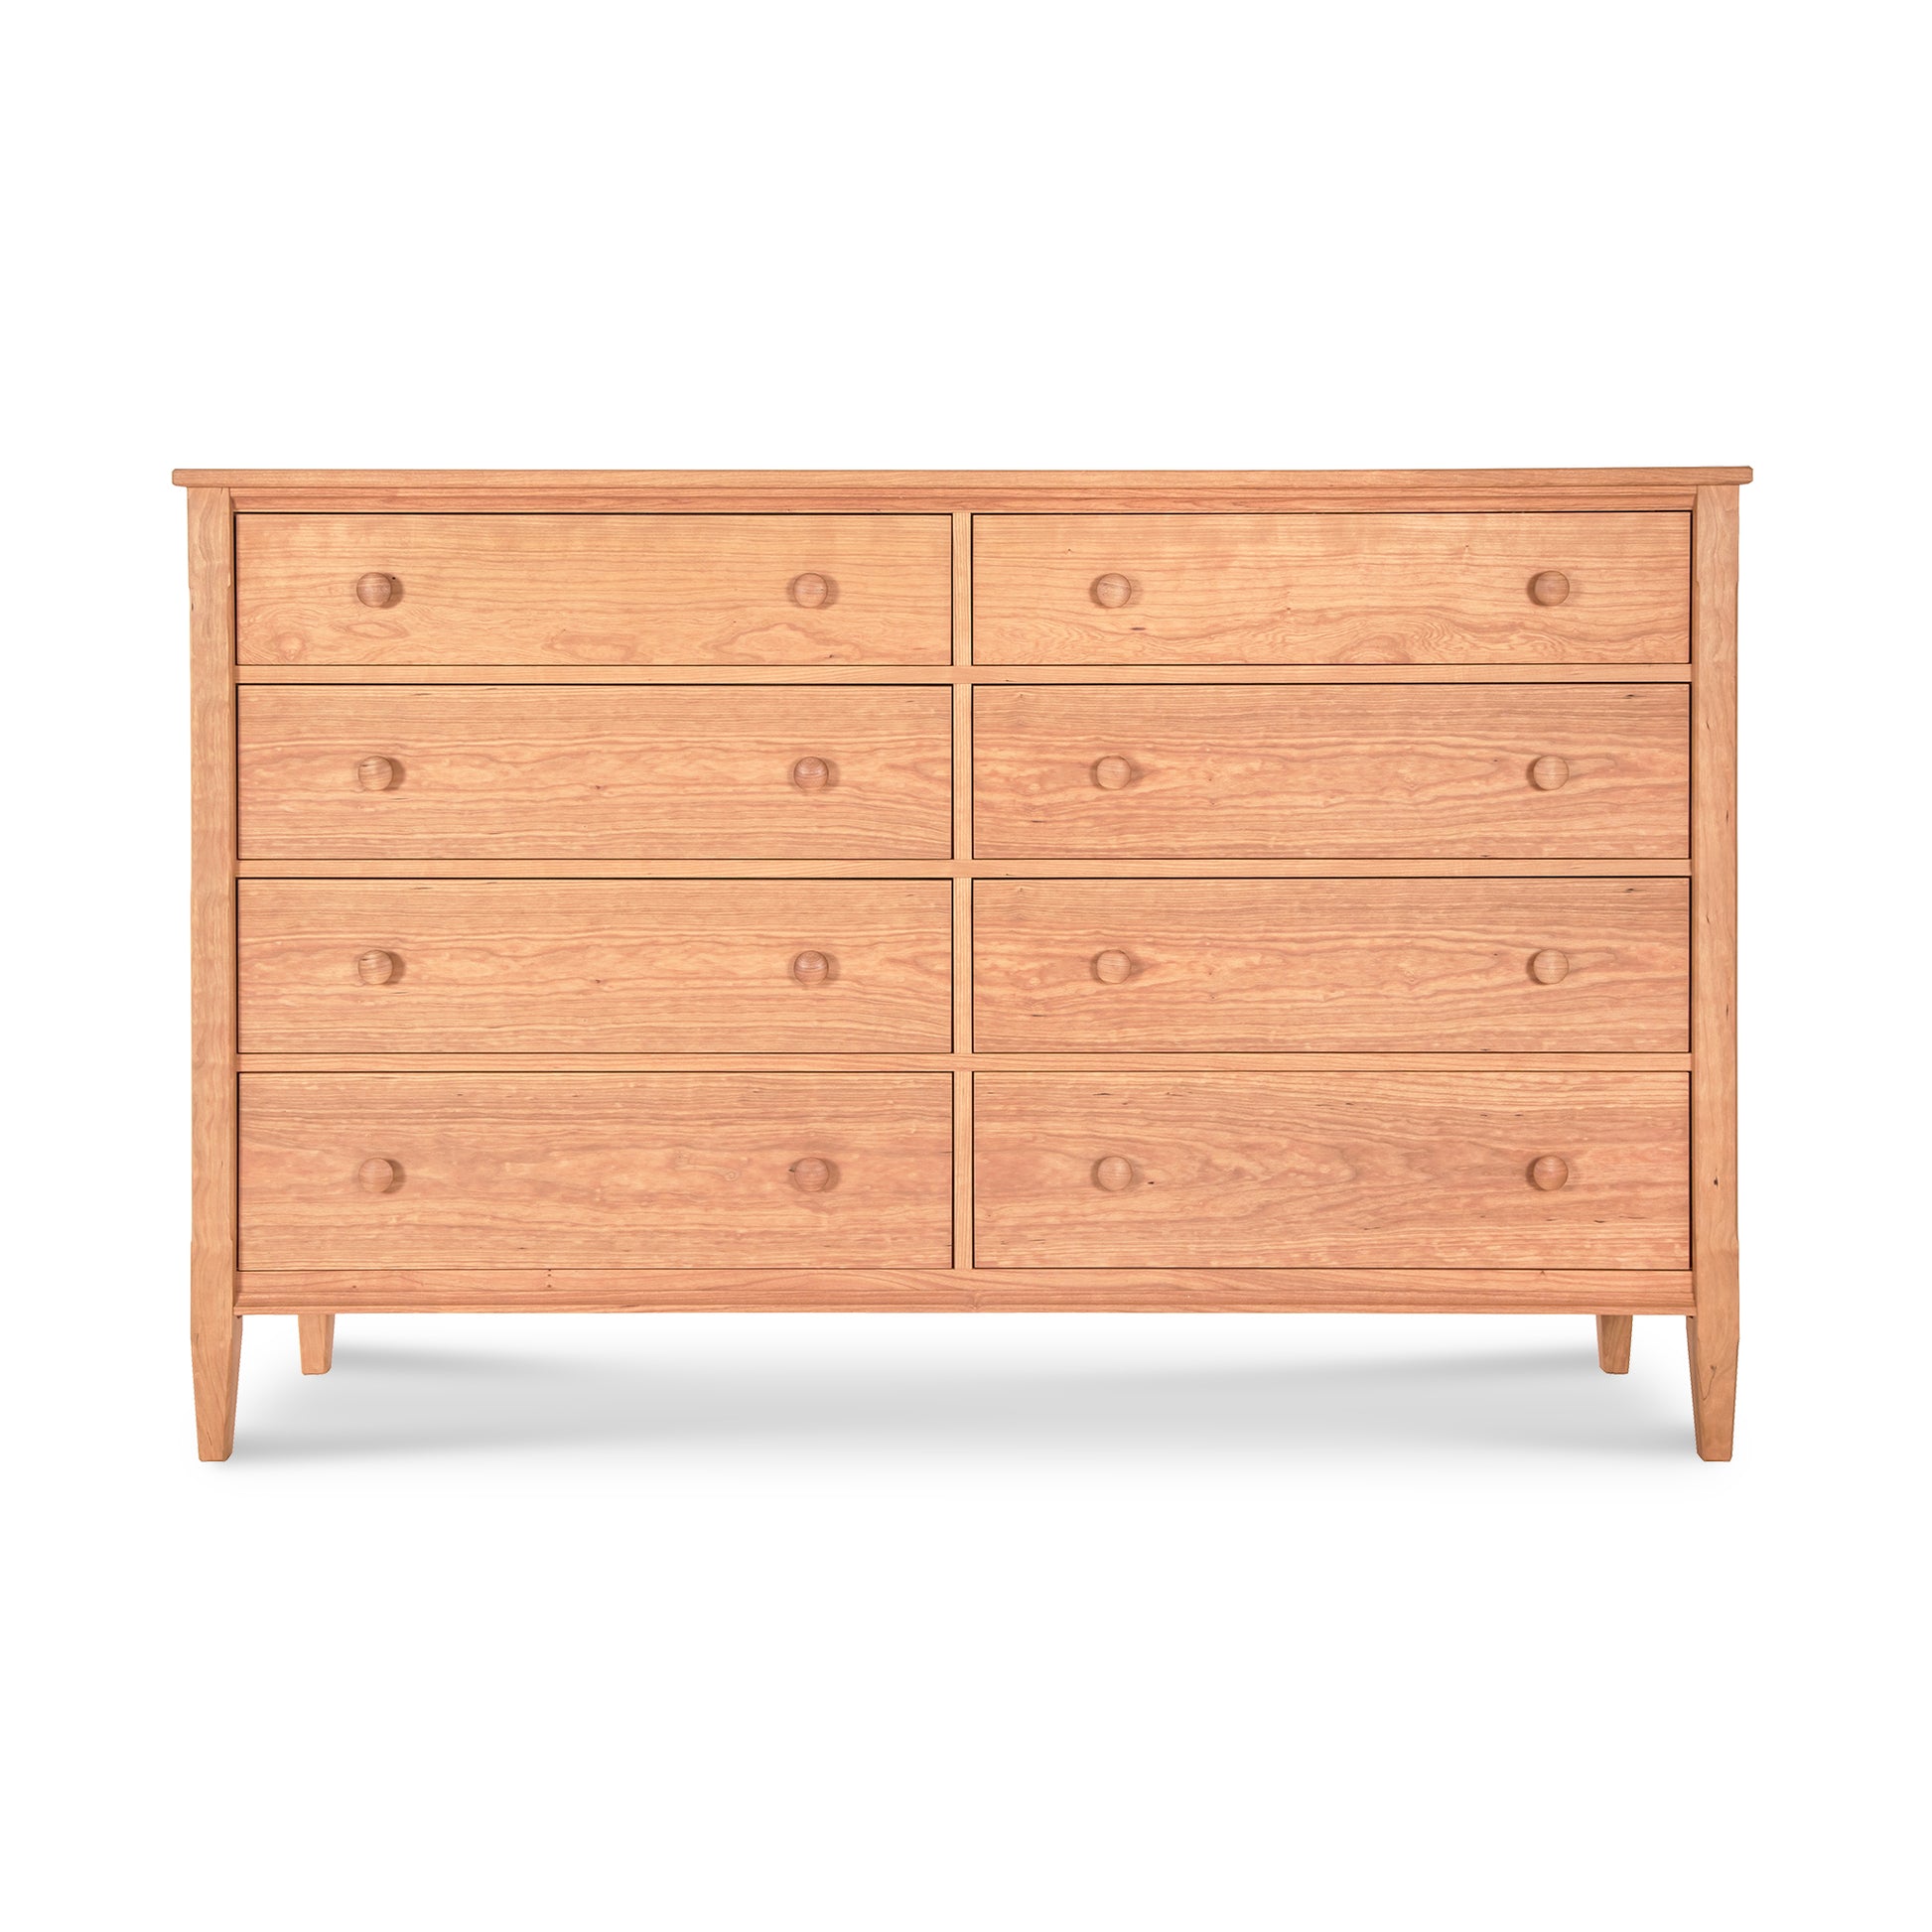 A Maple Corner Woodworks Vermont Shaker 8-Drawer Dresser made of wood, displayed on a white background.